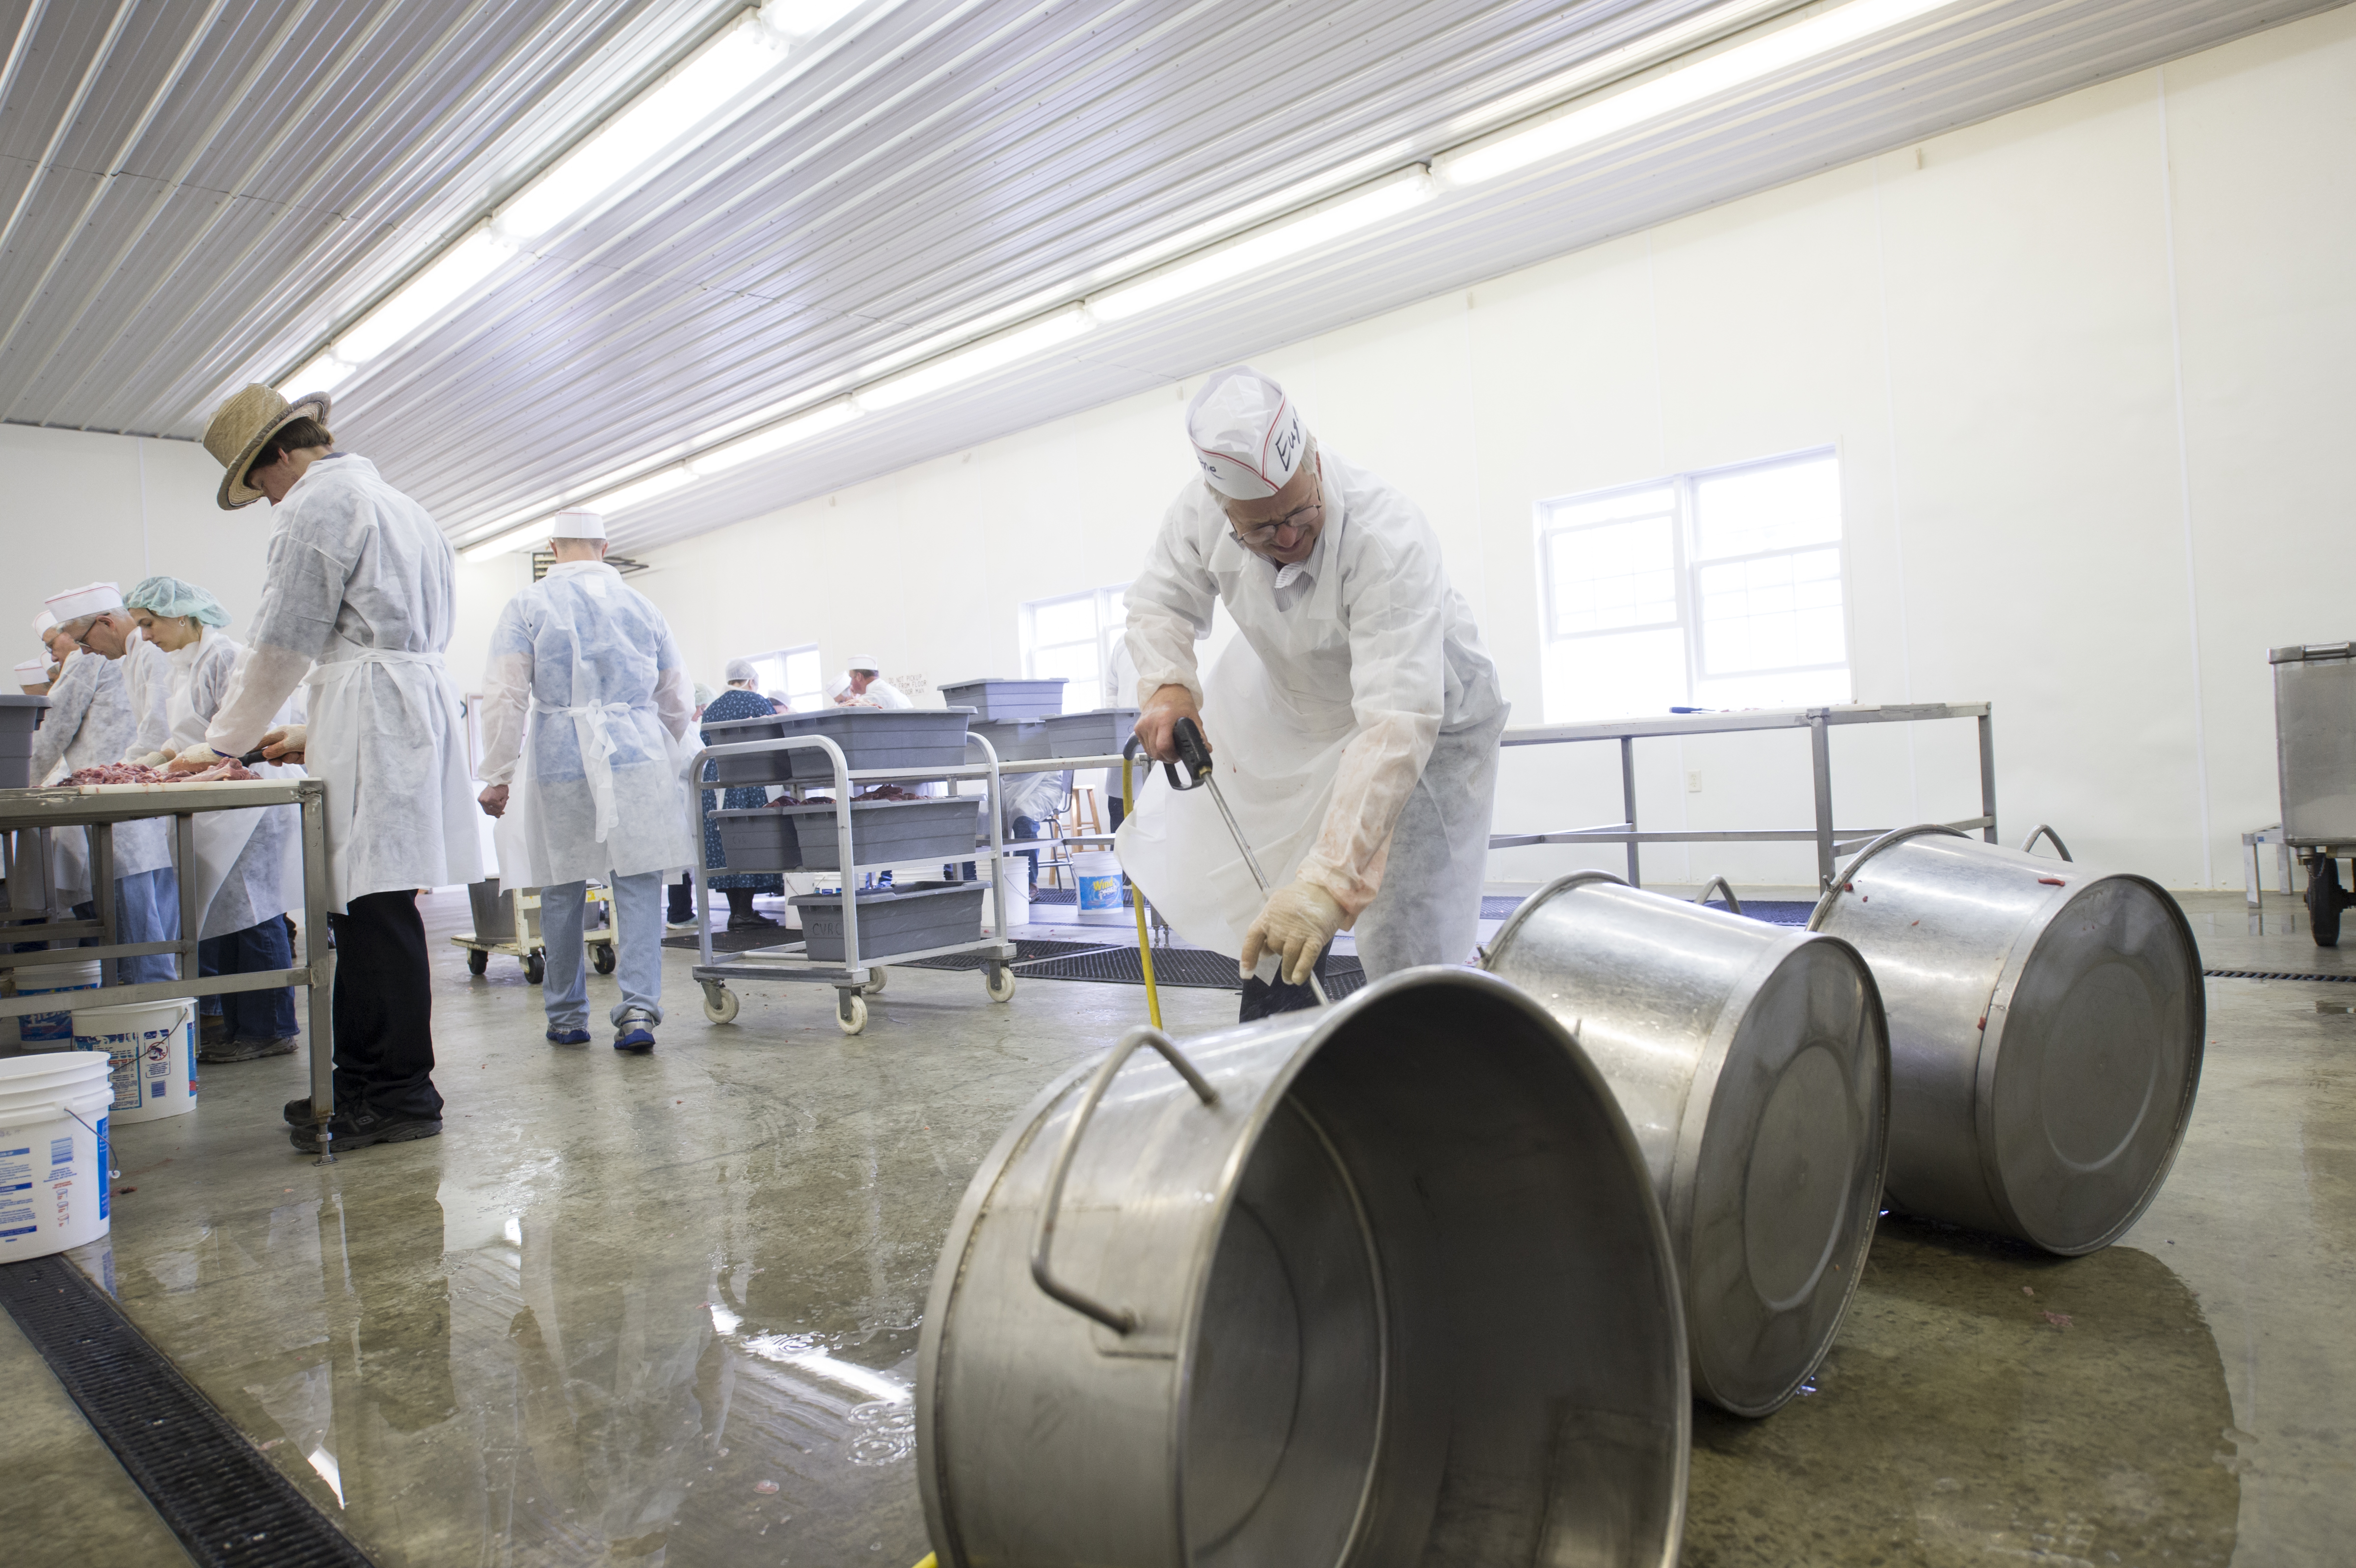 Man sprays off stainless steel tubs while other people in hair nets and aprons work in background